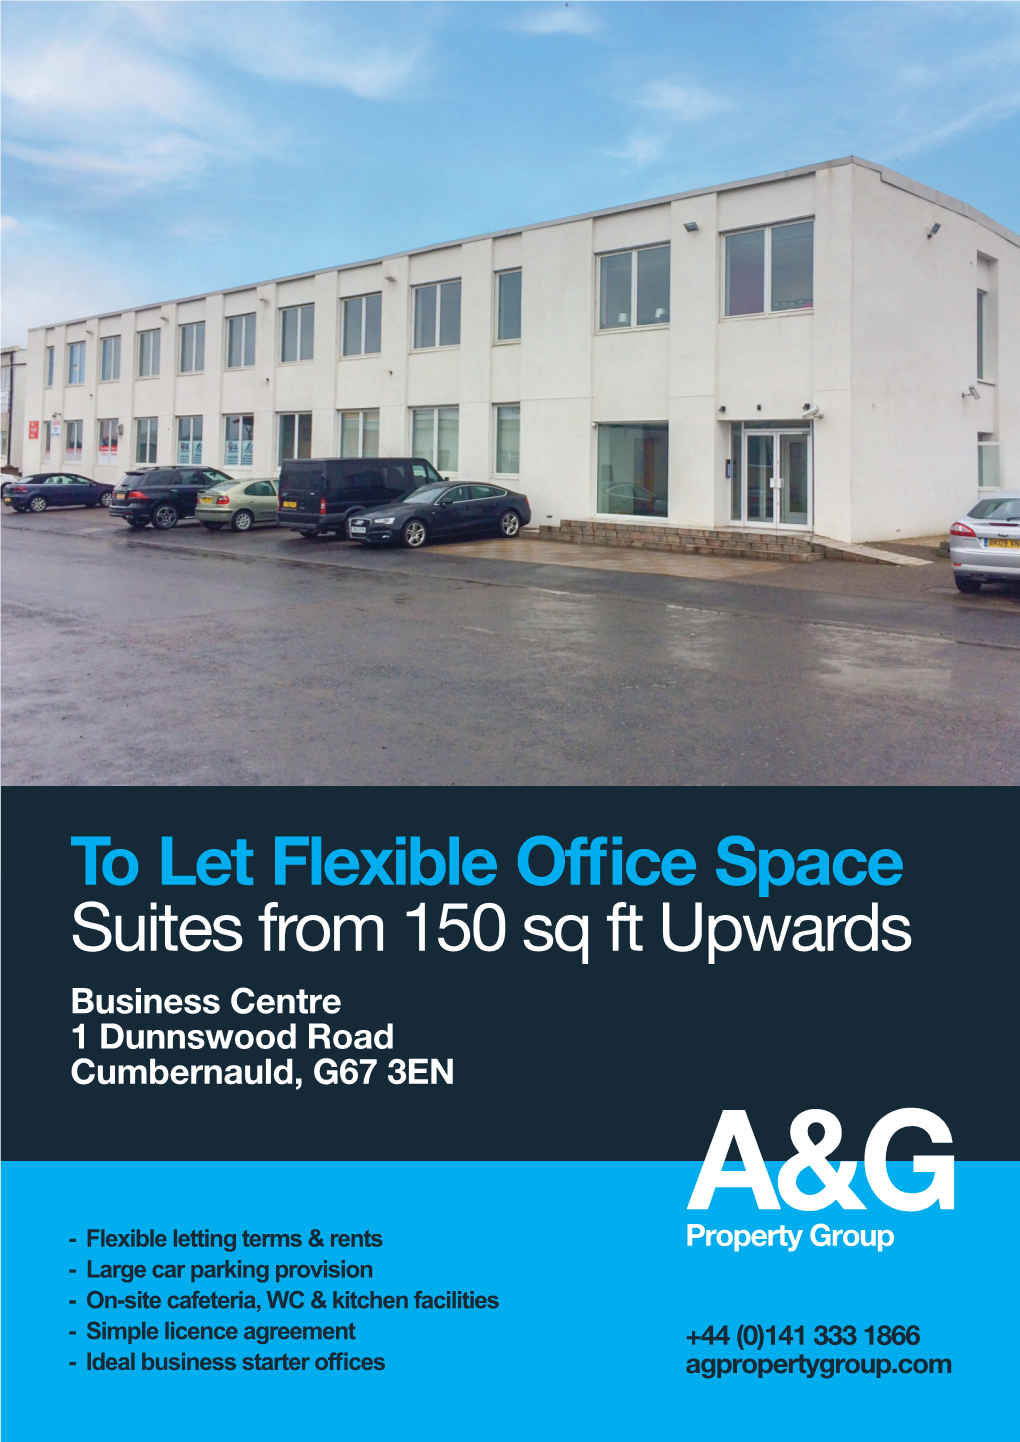 To Let Flexible Office Space Suites from 150 Sq Ft Upwards Business Centre 1 Dunnswood Road Cumbernauld, G67 3EN